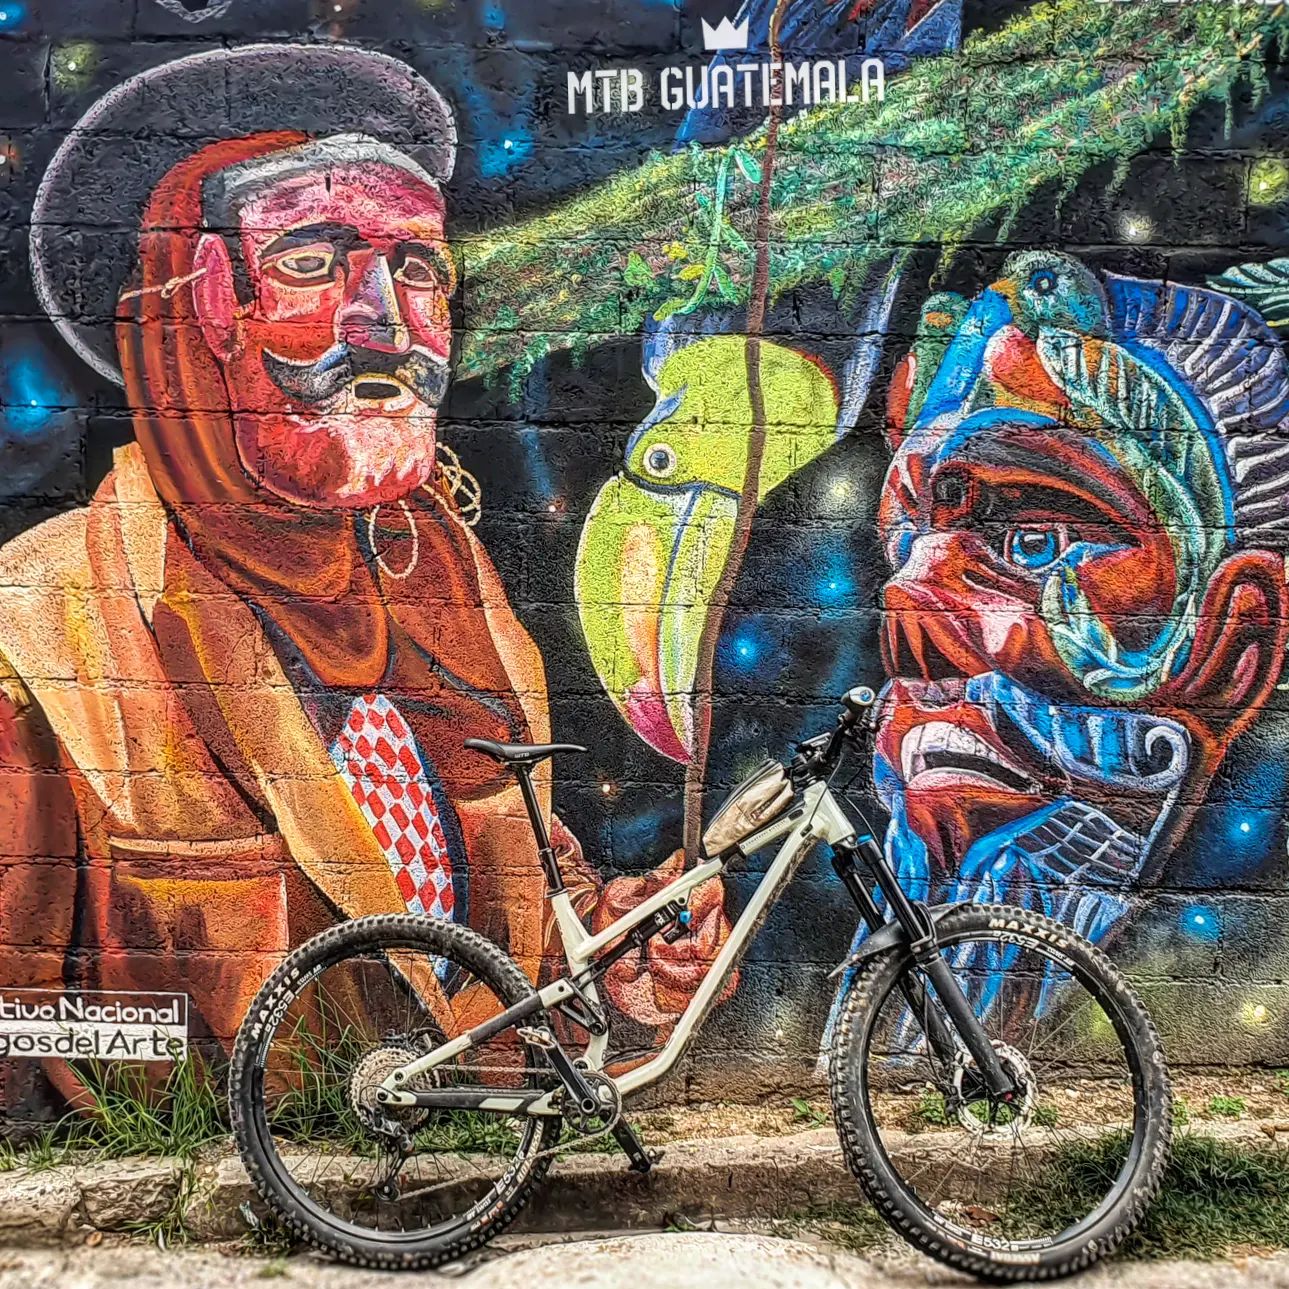 Maximón is revered by the Maya throughout the Guatemalan highlands
👹
San Simon is the unrecognized Spanish saint, and Maximon is the Mayan shaman. Maximón is said to represent both light and dark, and to be a trickster. He is both a womanizer and a protector of couples.
.
#mayan #visitguatemala #mtbtravel #biketours #mtblife #mtbguide #mtbguatemala #mountainbikeguatemala #guatemala🇬🇹 #travelguatemala #centralamerica #gorideyourbike #mural #guate